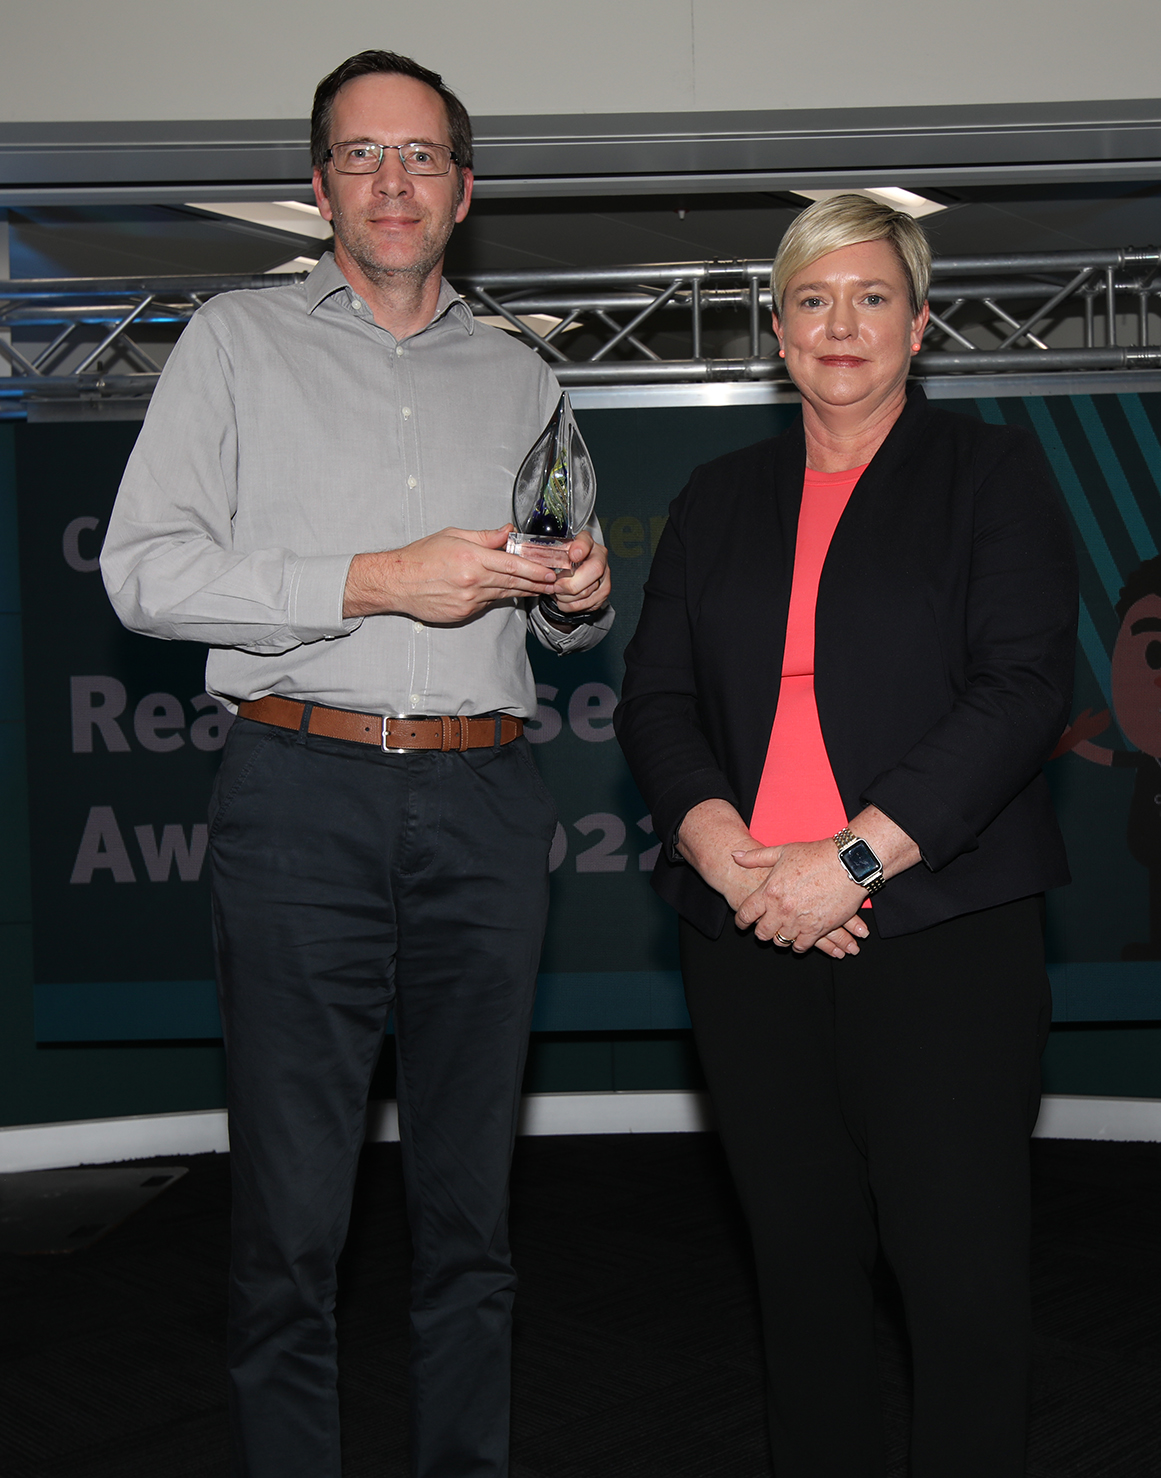 Workplace Award Winner – Department of Resources